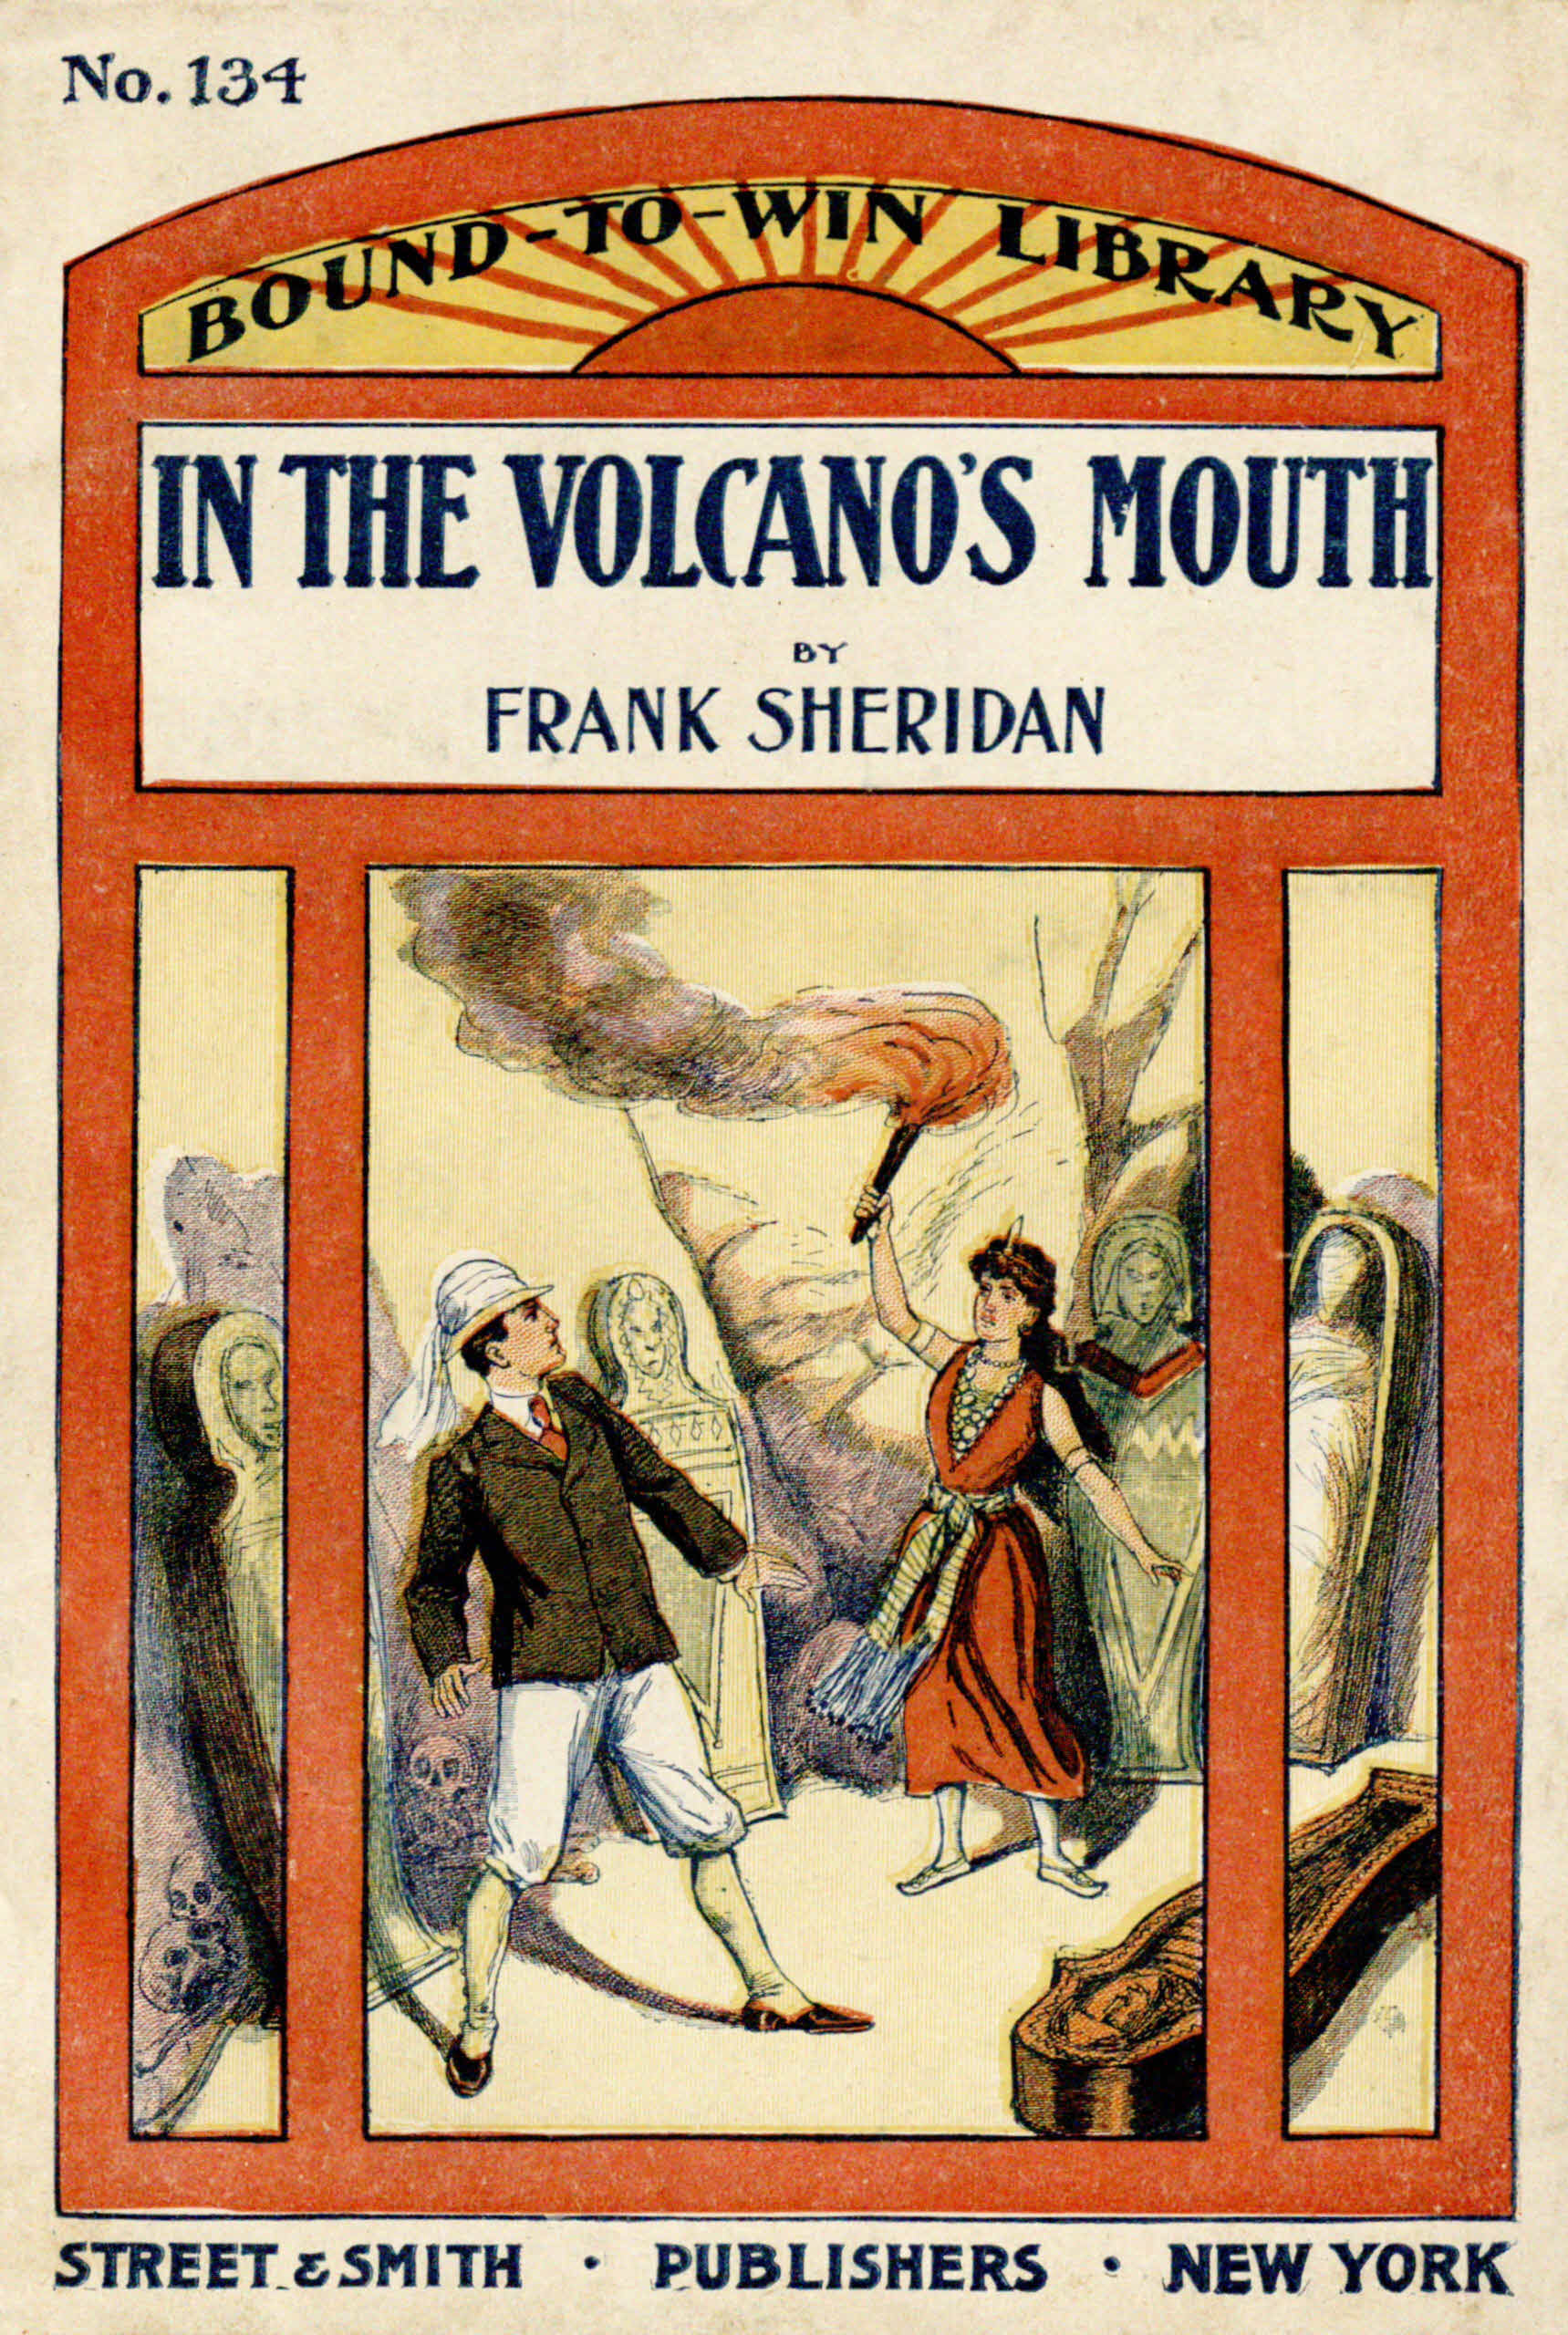 In the Volcano's Mouth, by Frank Sheridan—A Project Gutenberg eBook